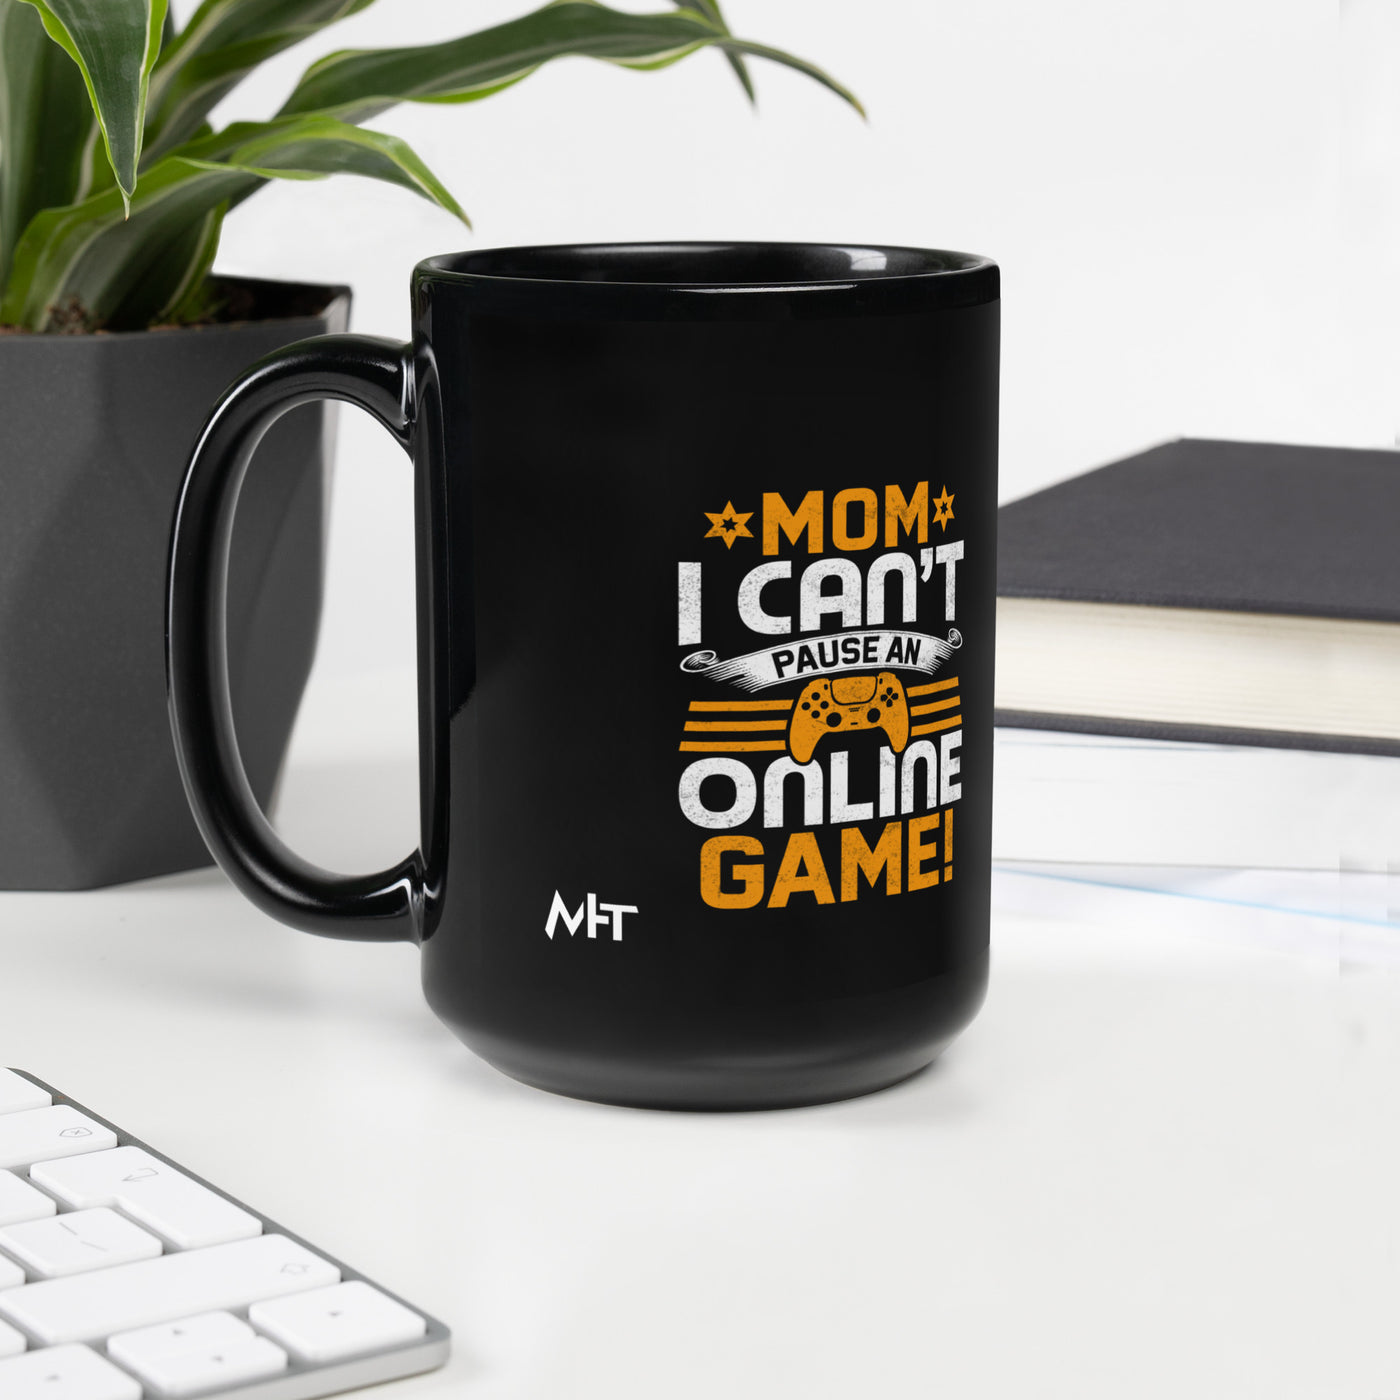 *MOM*! I can't Pause an Online Game - Black Glossy Mug